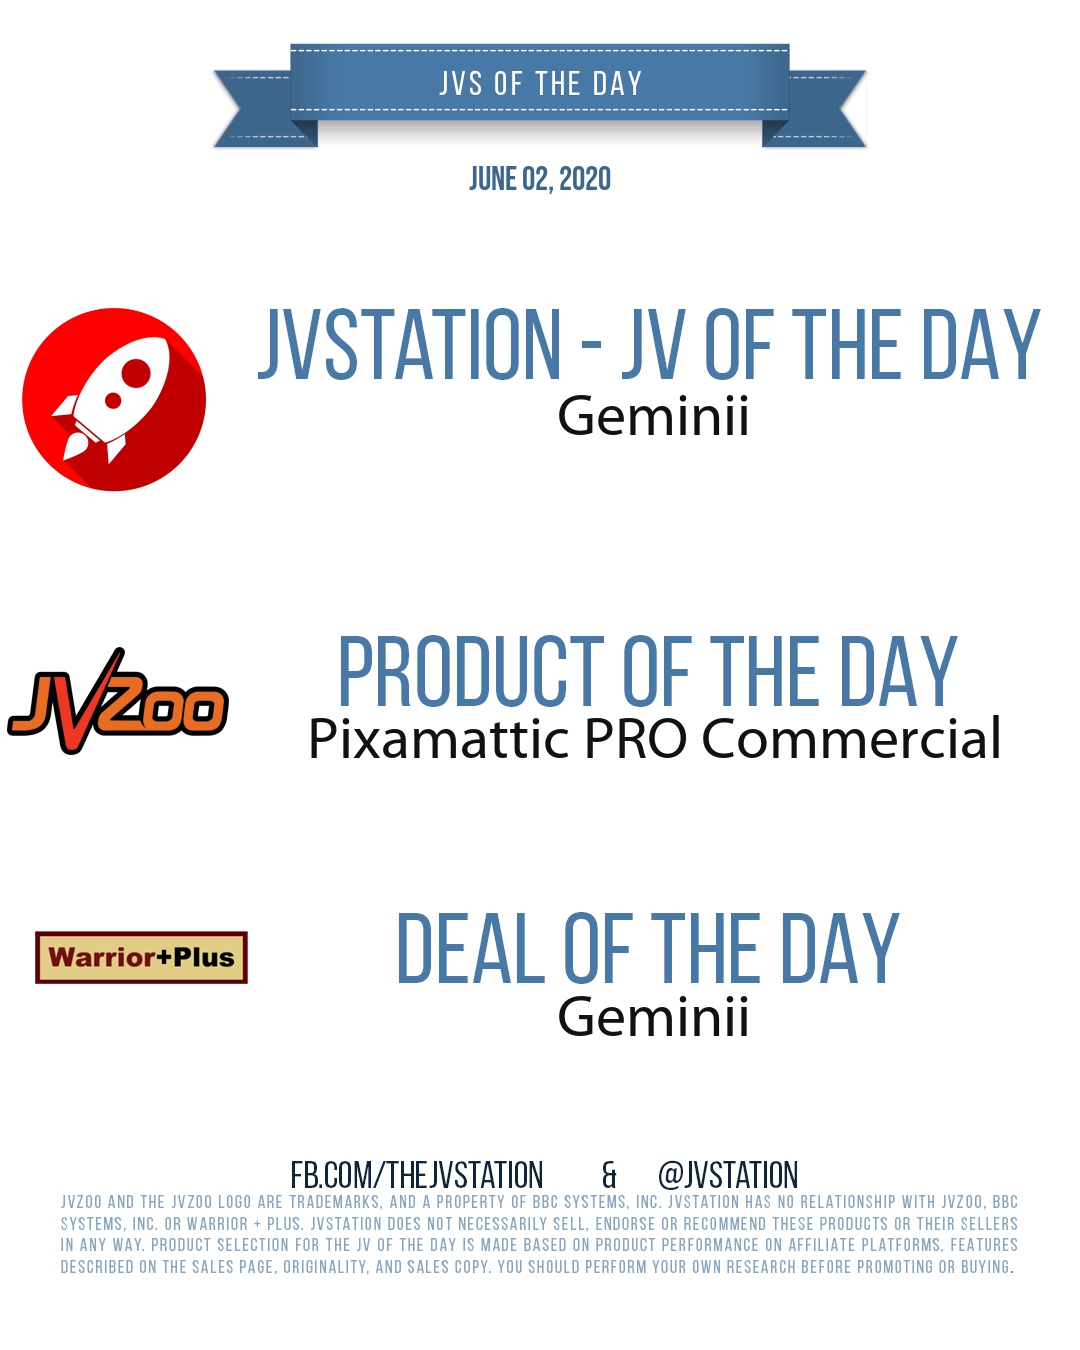 JVs of the day - June 02, 2020